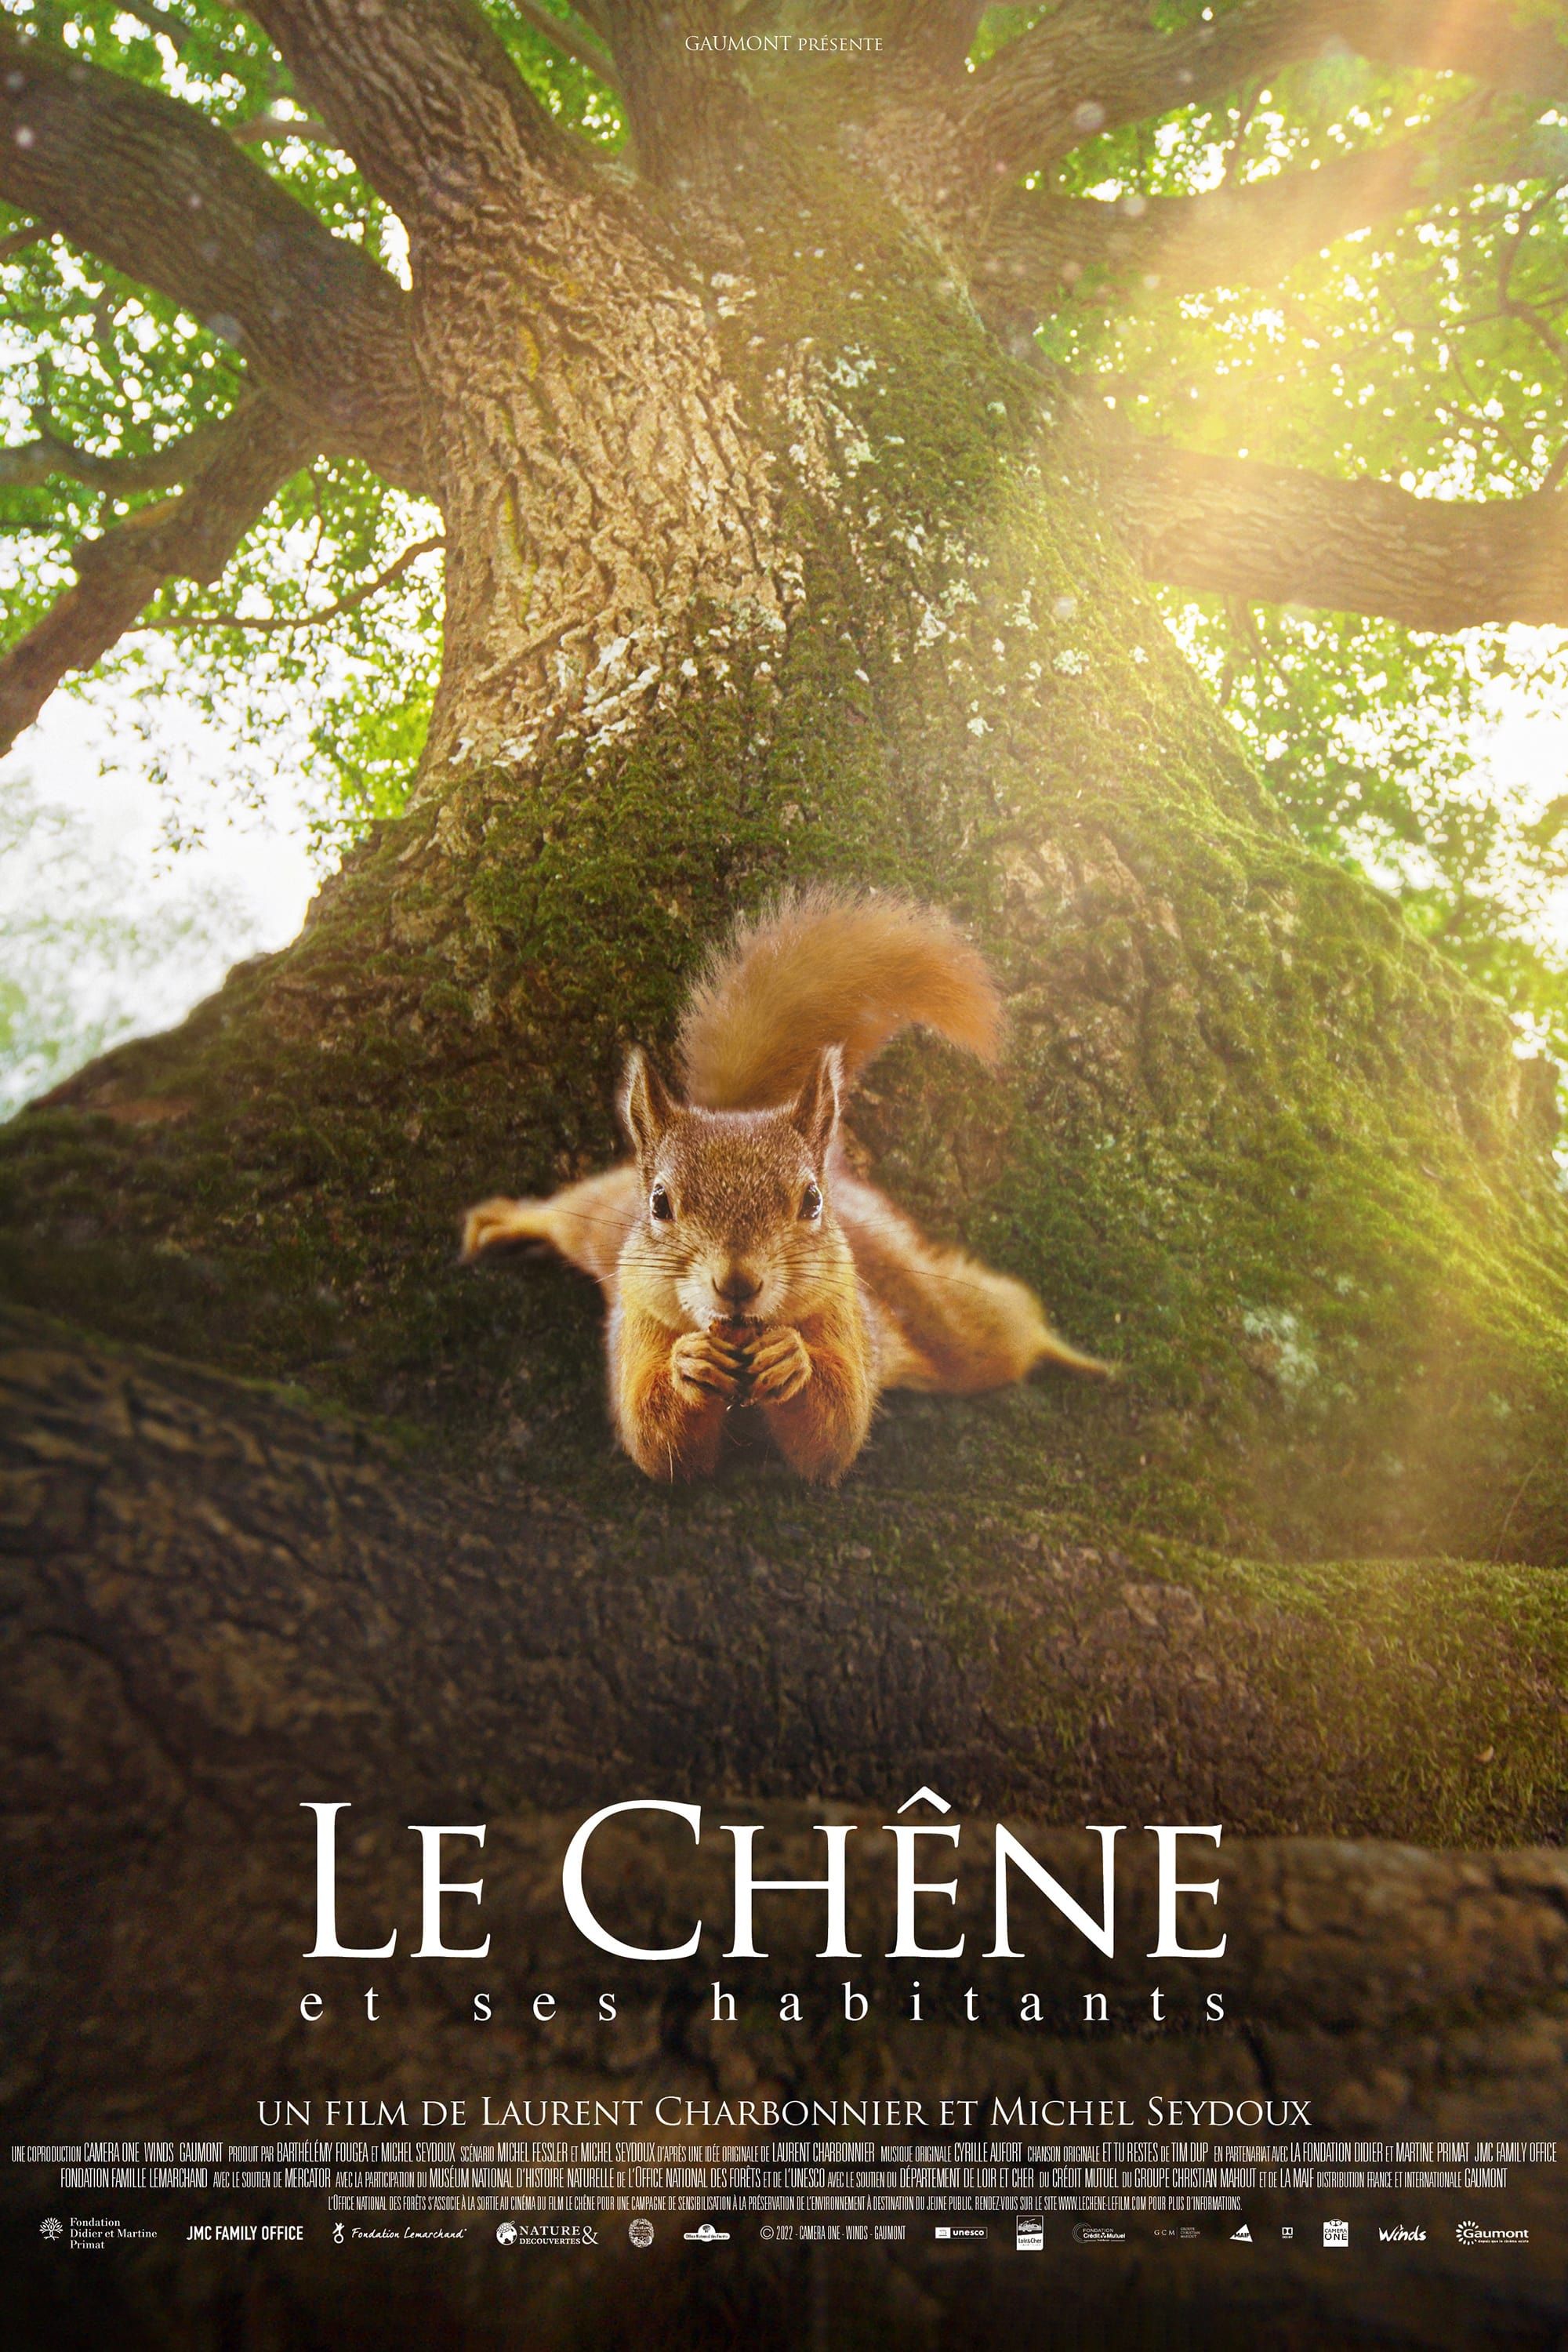 Le Chêne - Documentaire (2022) streaming VF gratuit complet